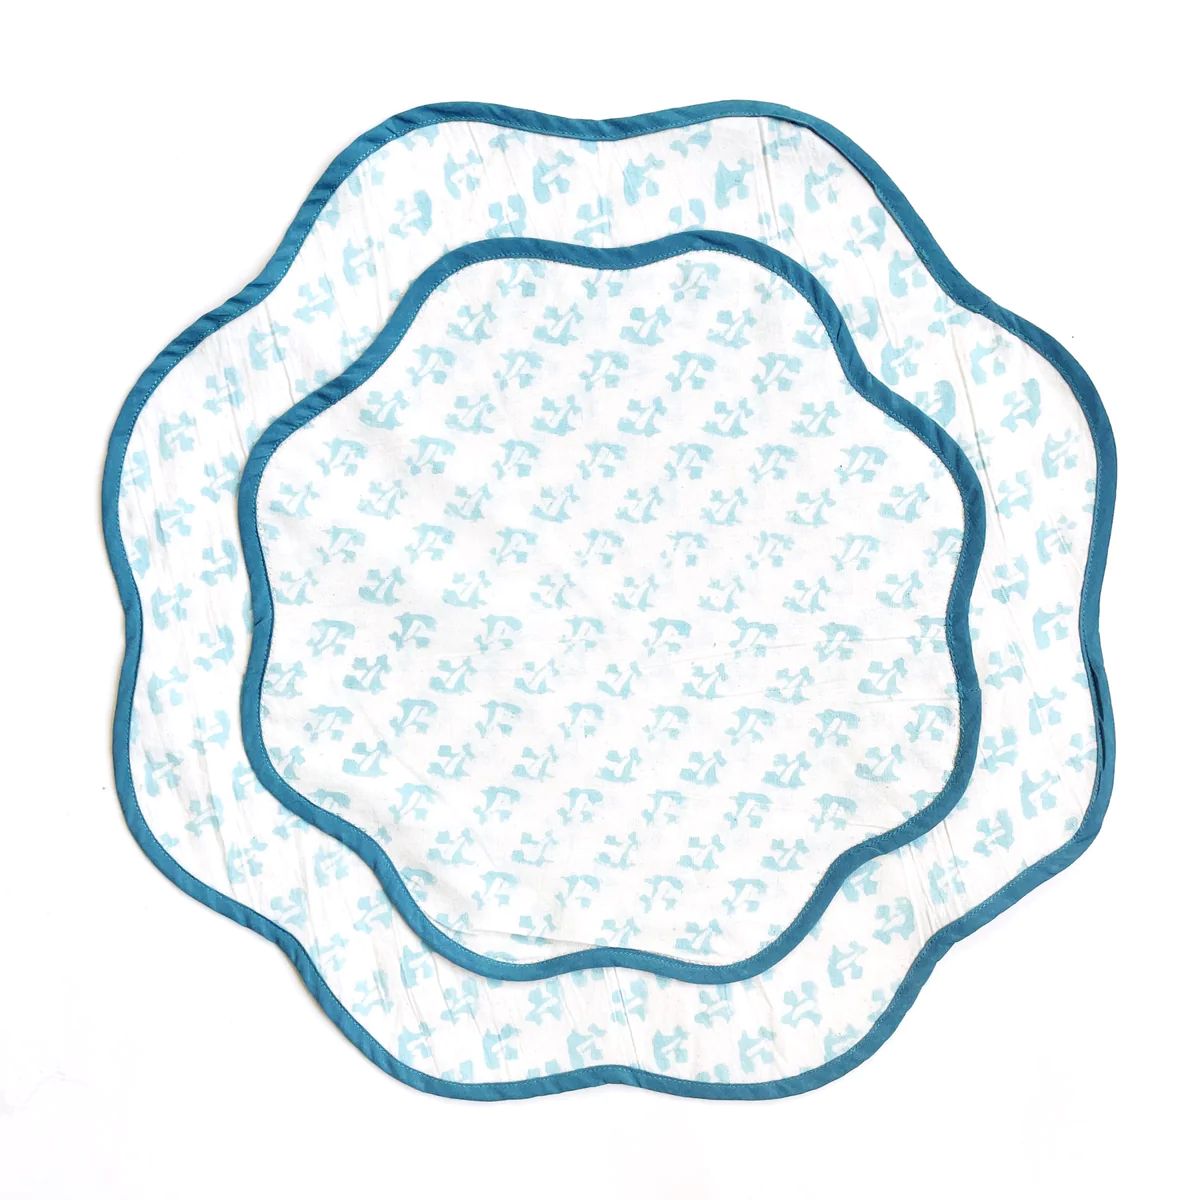 THE SCALLOPED TEAL PLACEMAT | Modafleur